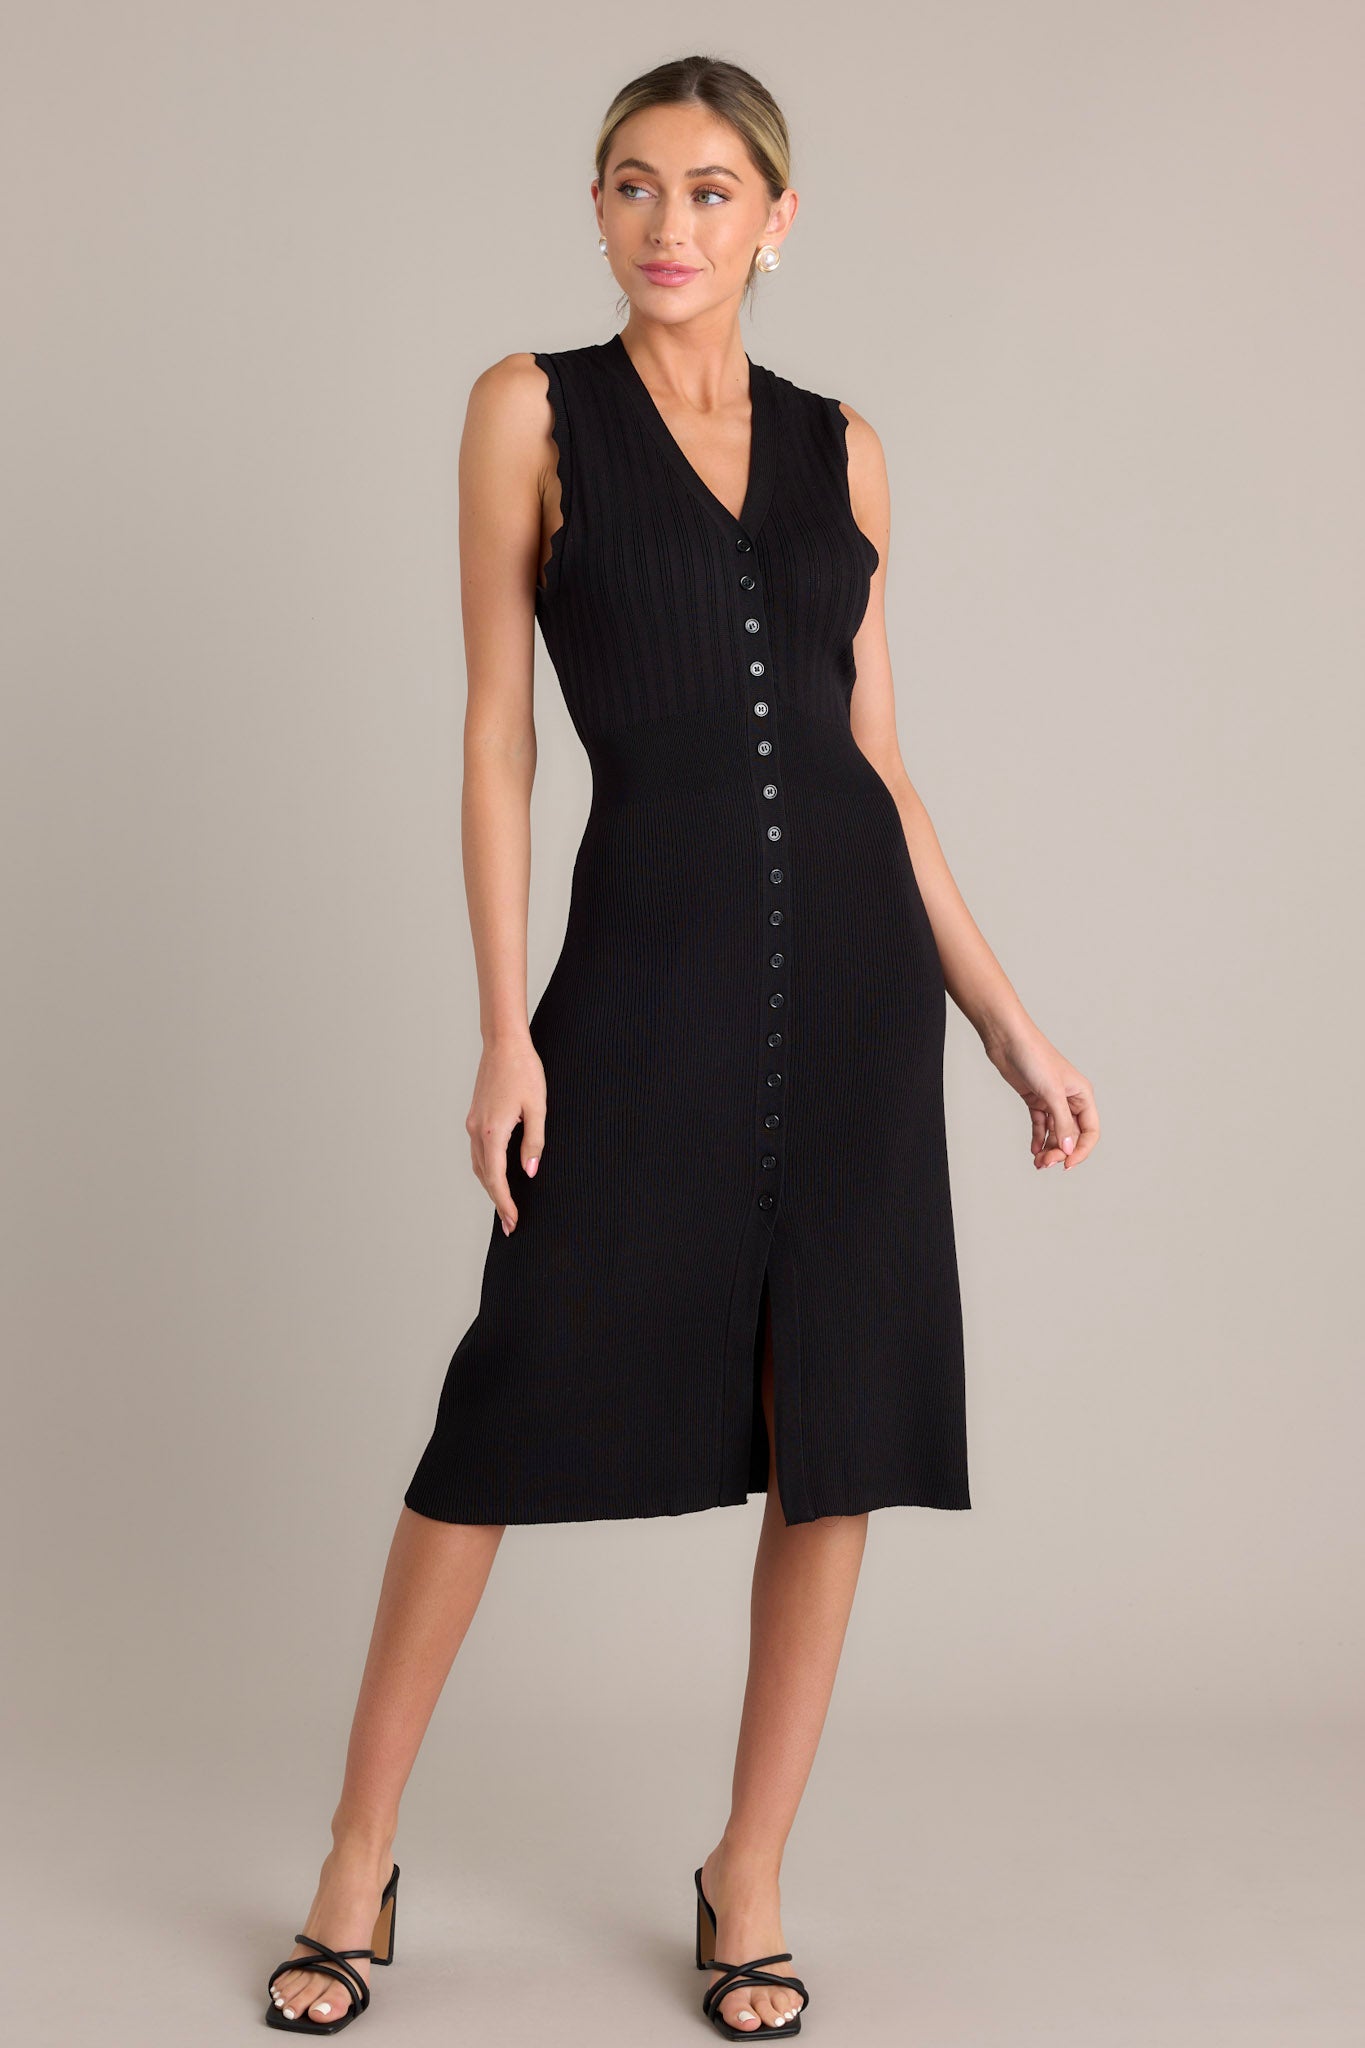 Action shot of a black dress displaying the fit and movement, highlighting the v-neckline, functional button front, front slit, and scalloped sleeves.